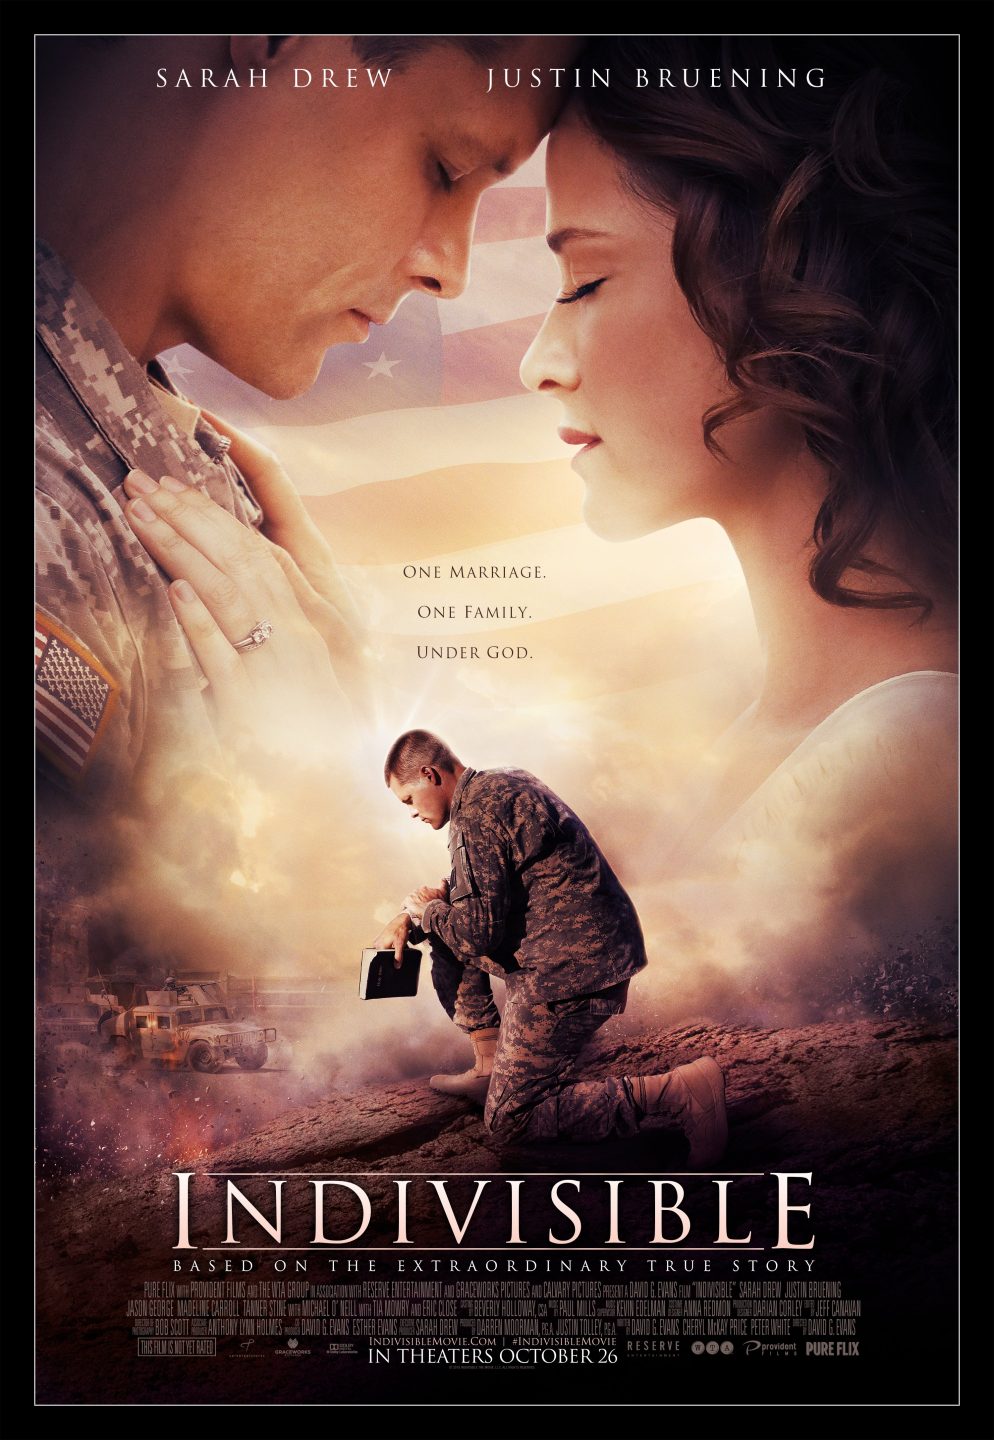 Indivisible poster (Pure Flix)